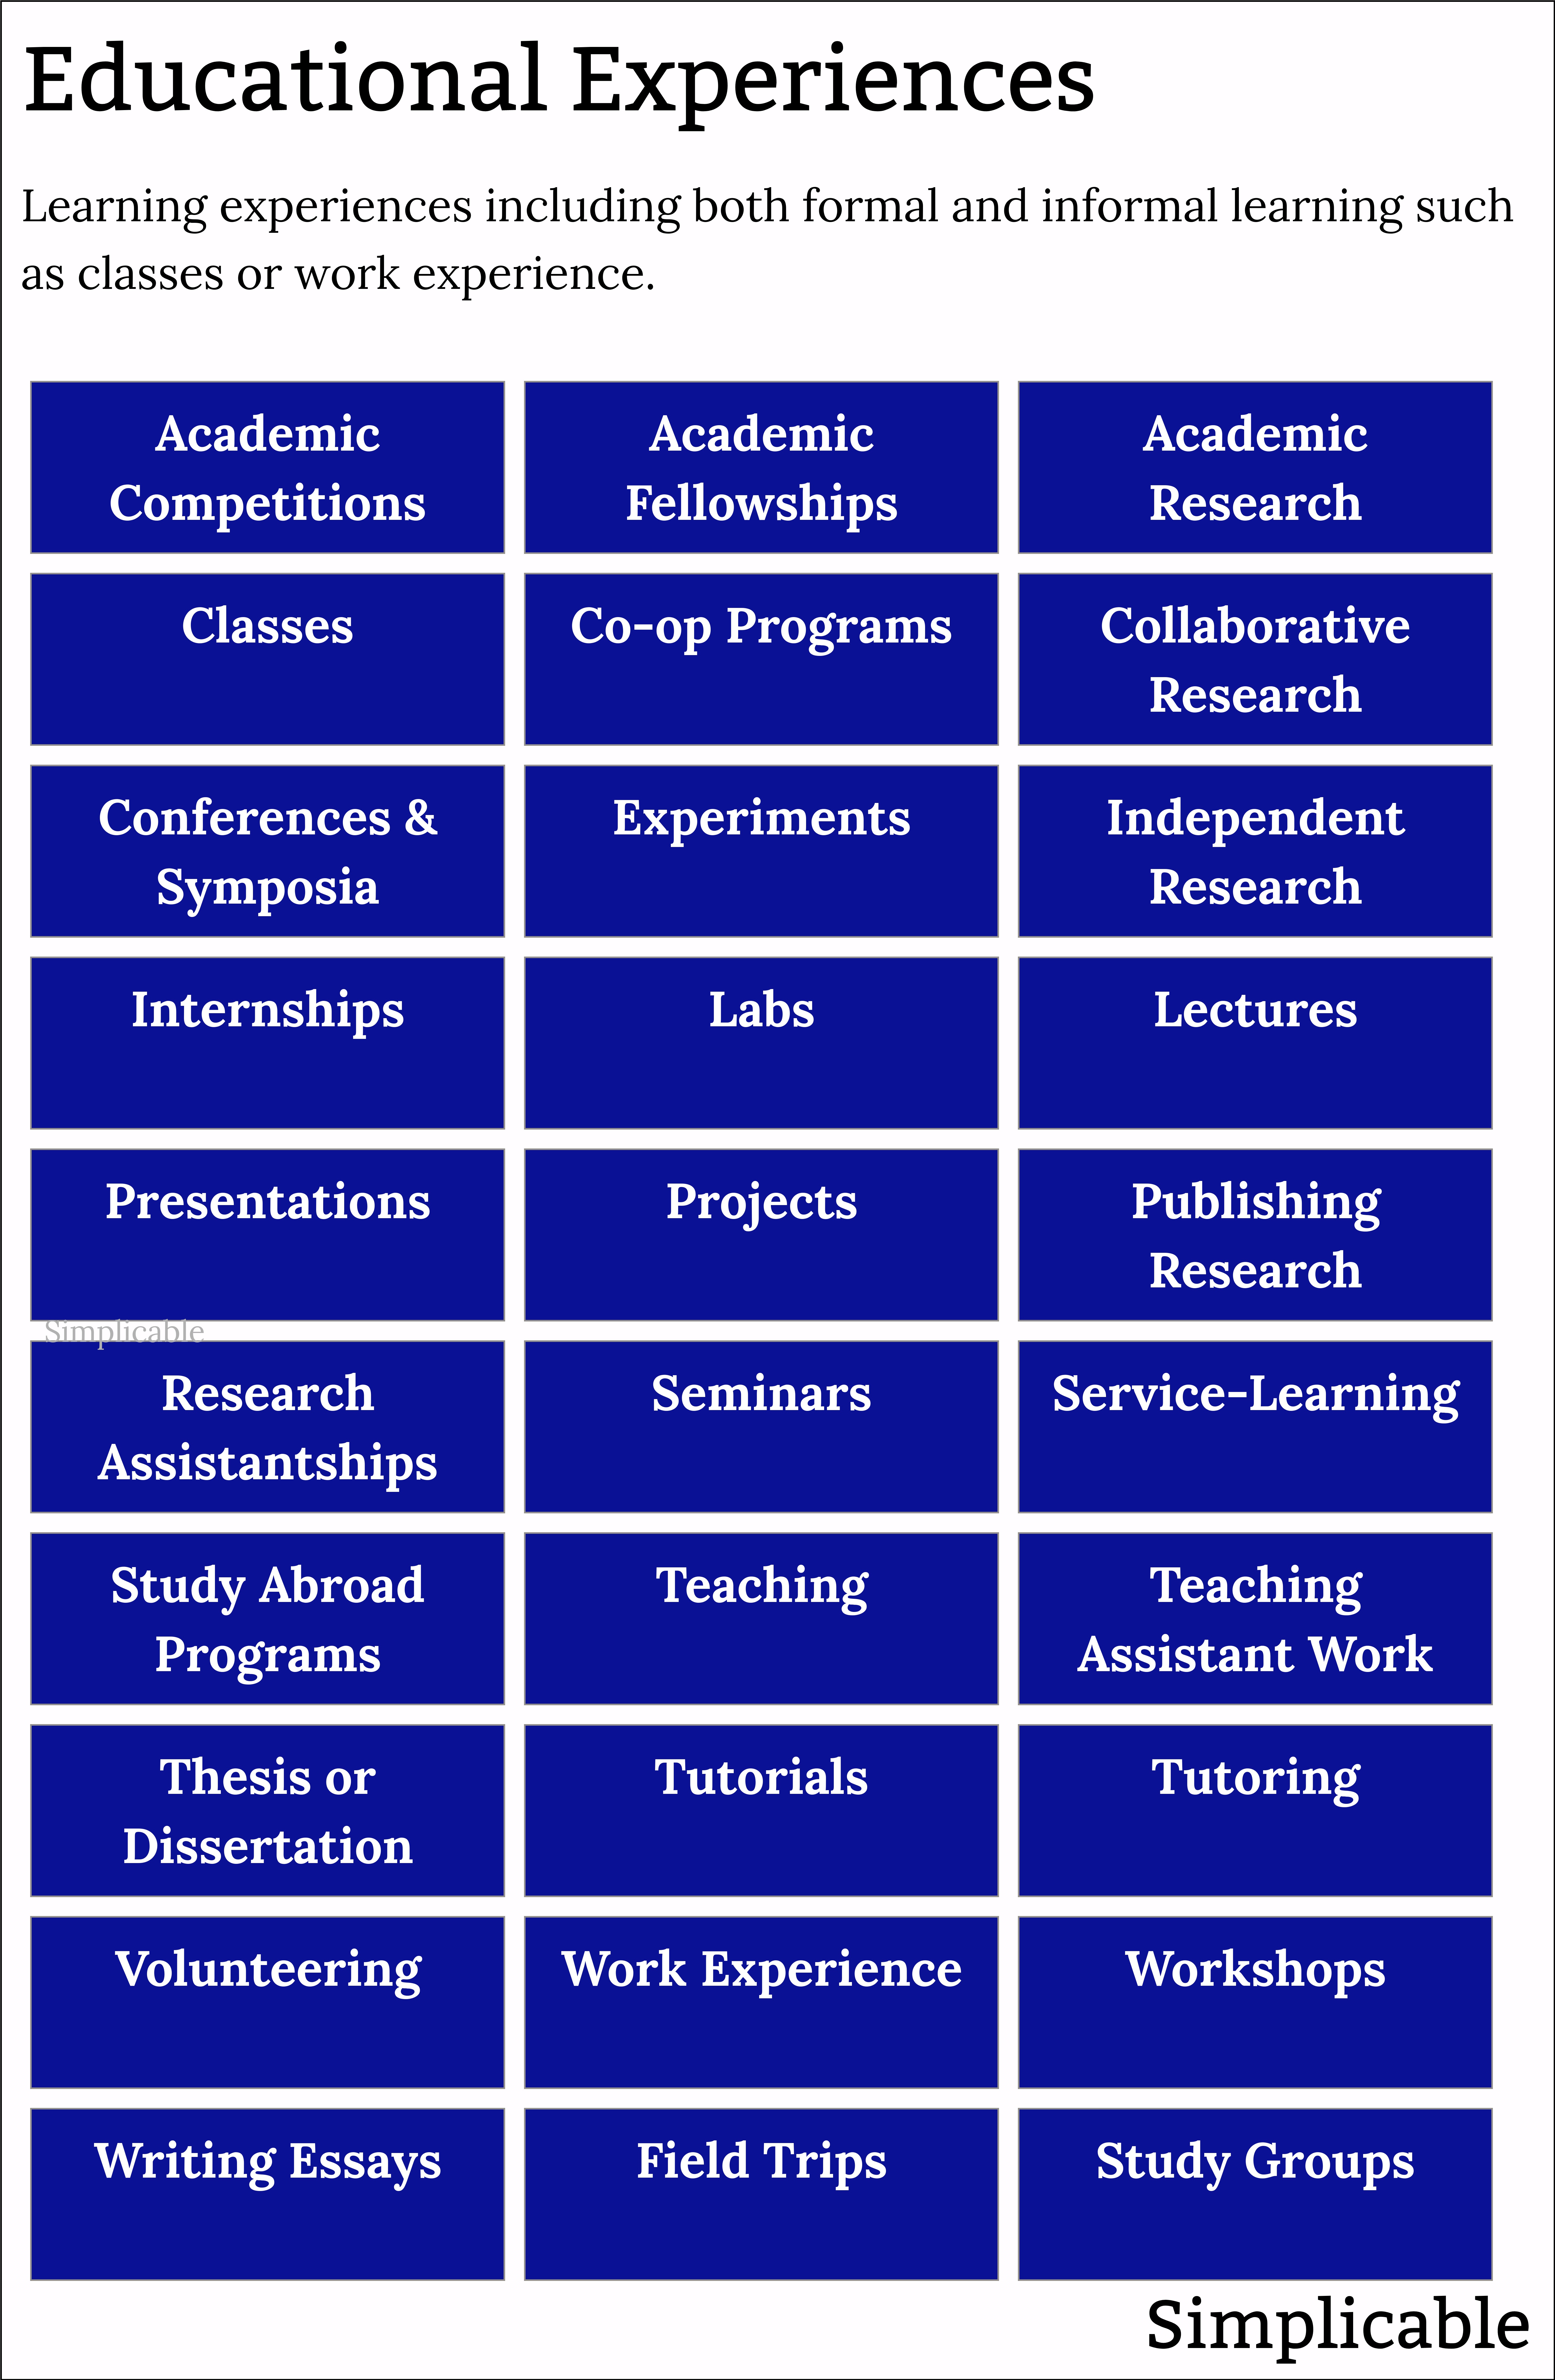 types of educational experiences